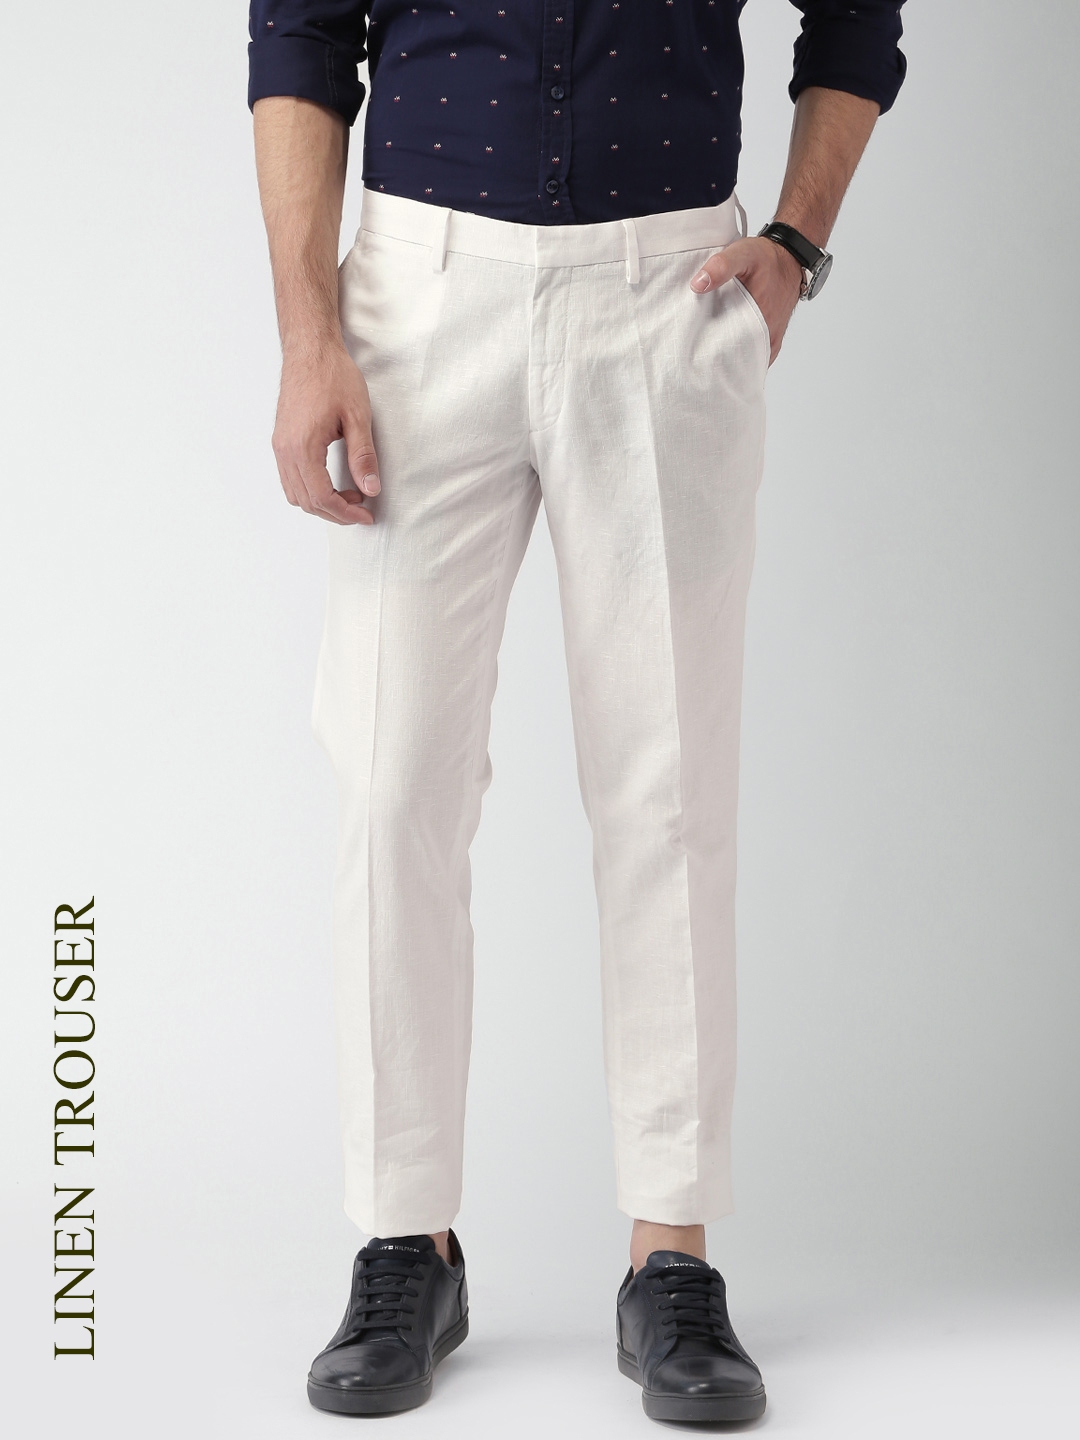 Buy Off White Trousers  Pants for Women by Outryt Online  Ajiocom